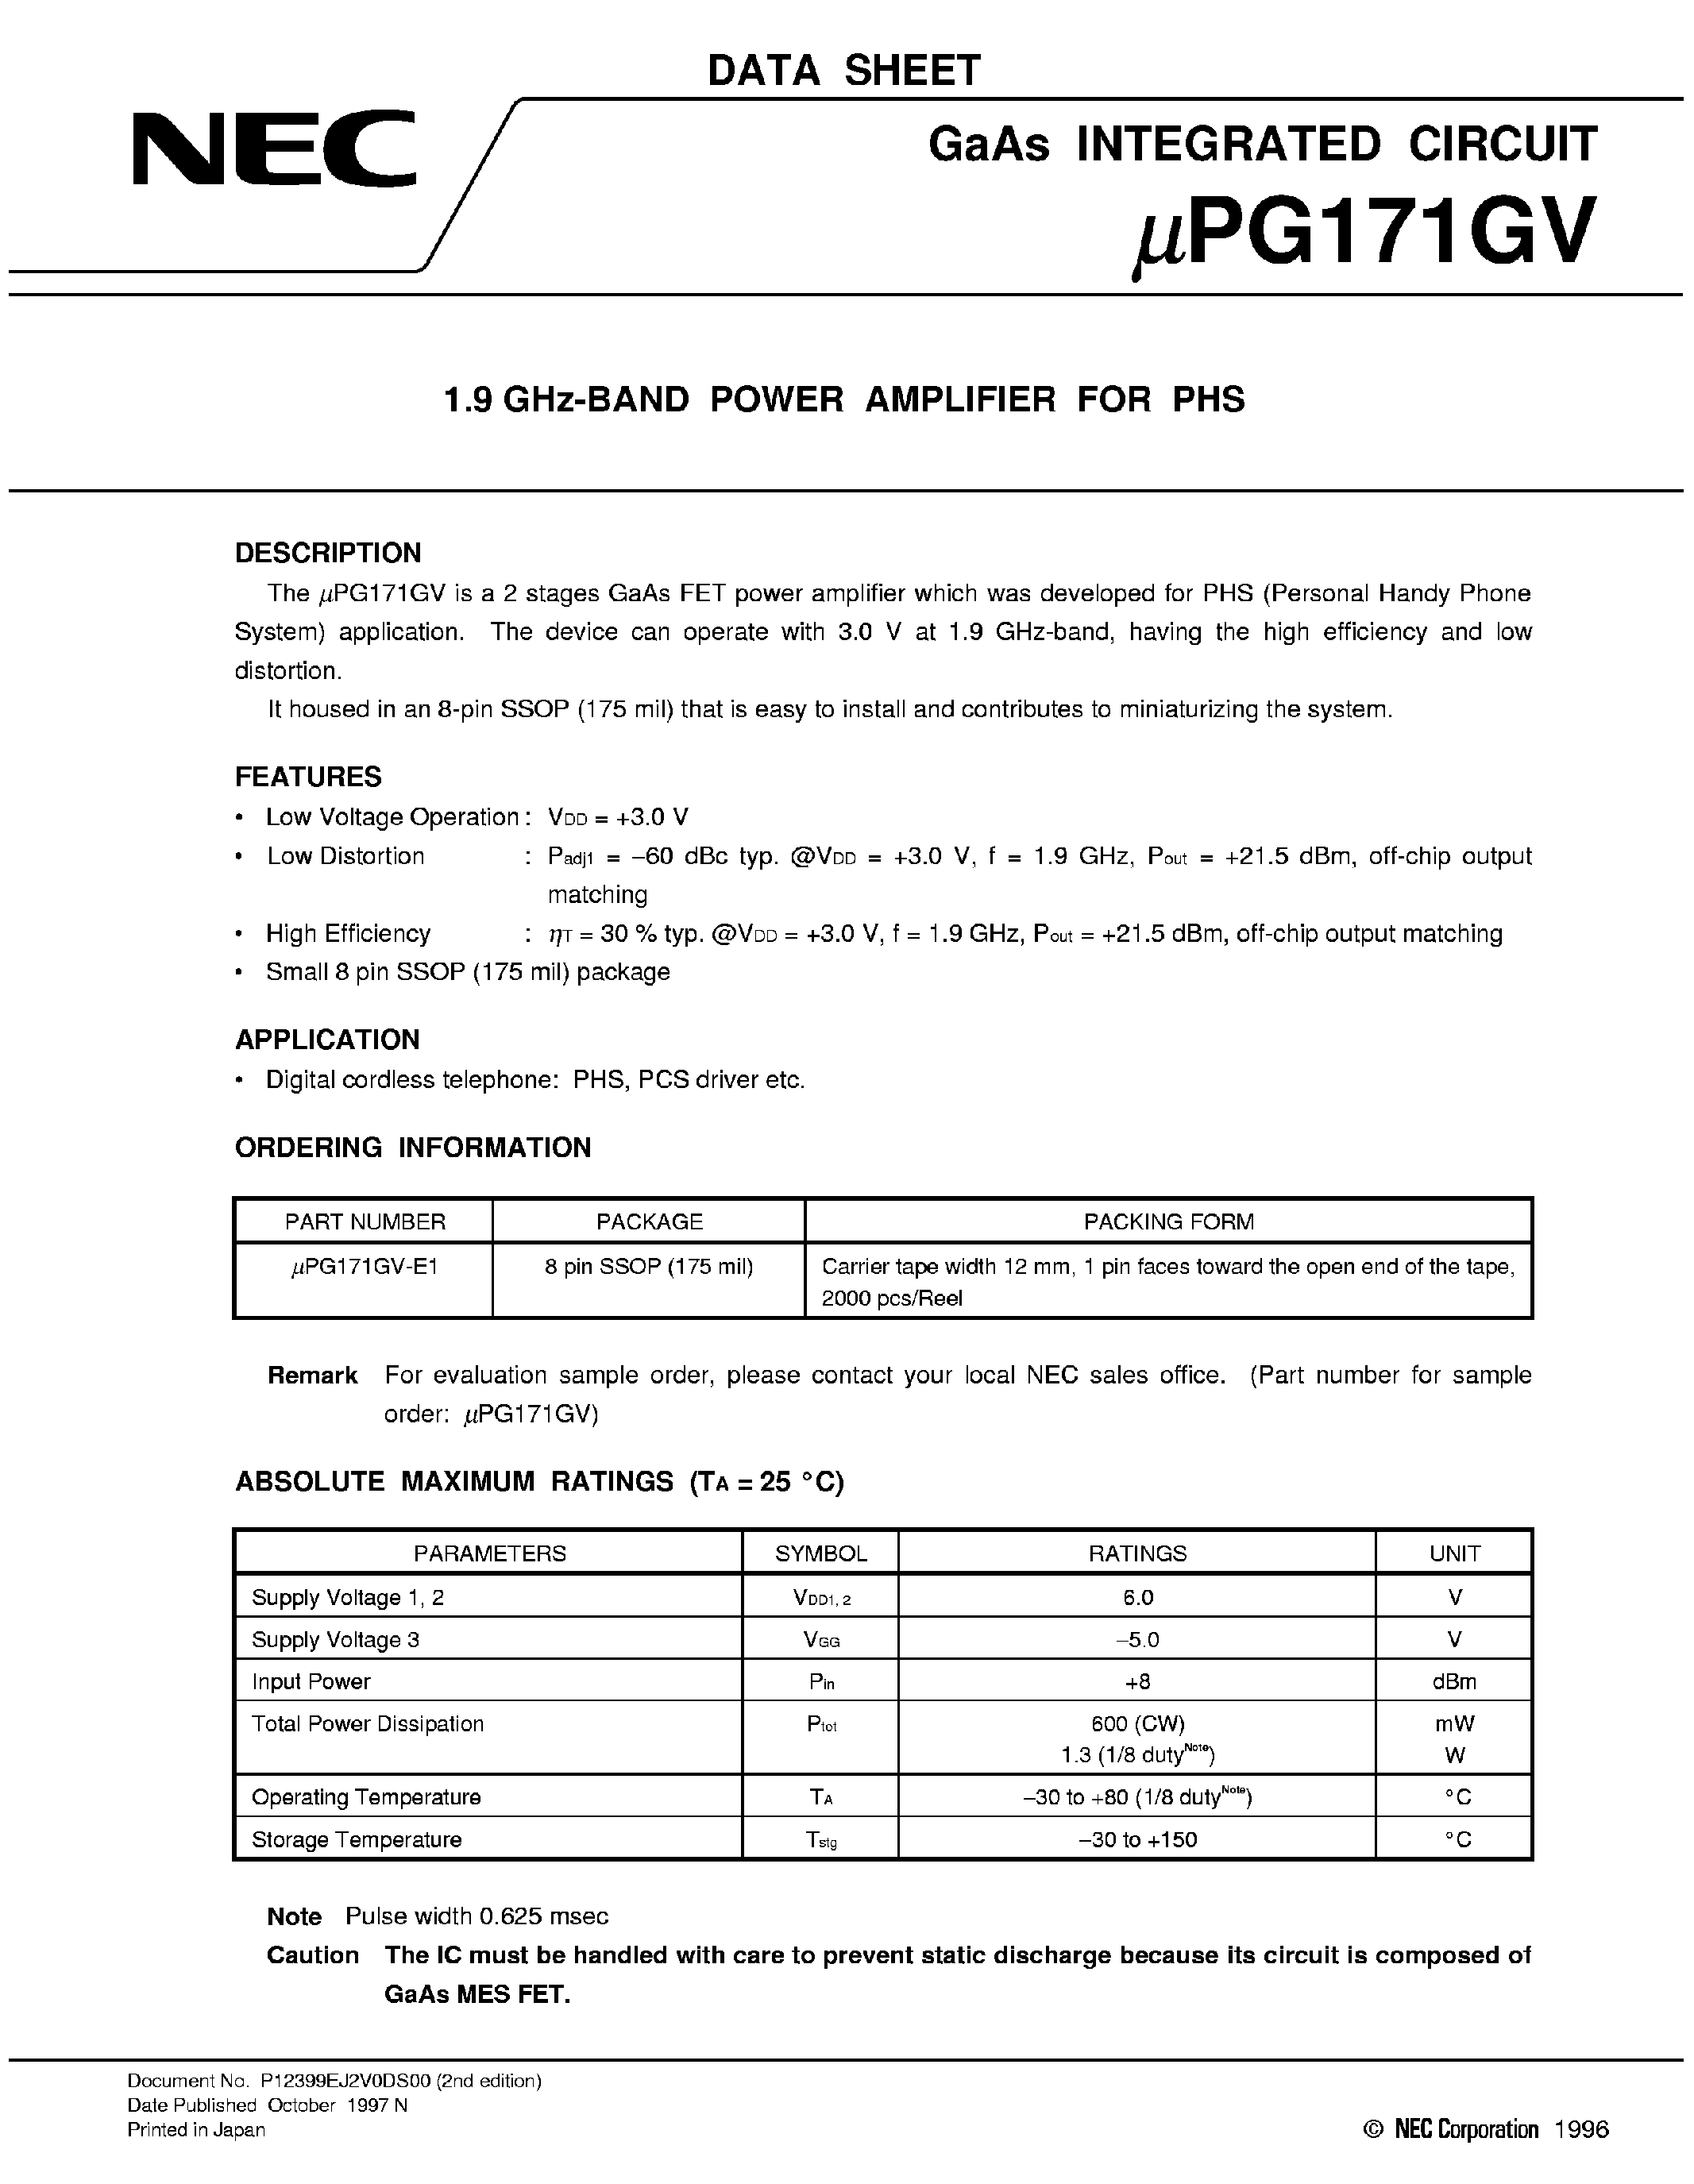 Datasheet UPG171GV - 1.9 GHz Band Power Amplifier for PHS page 1